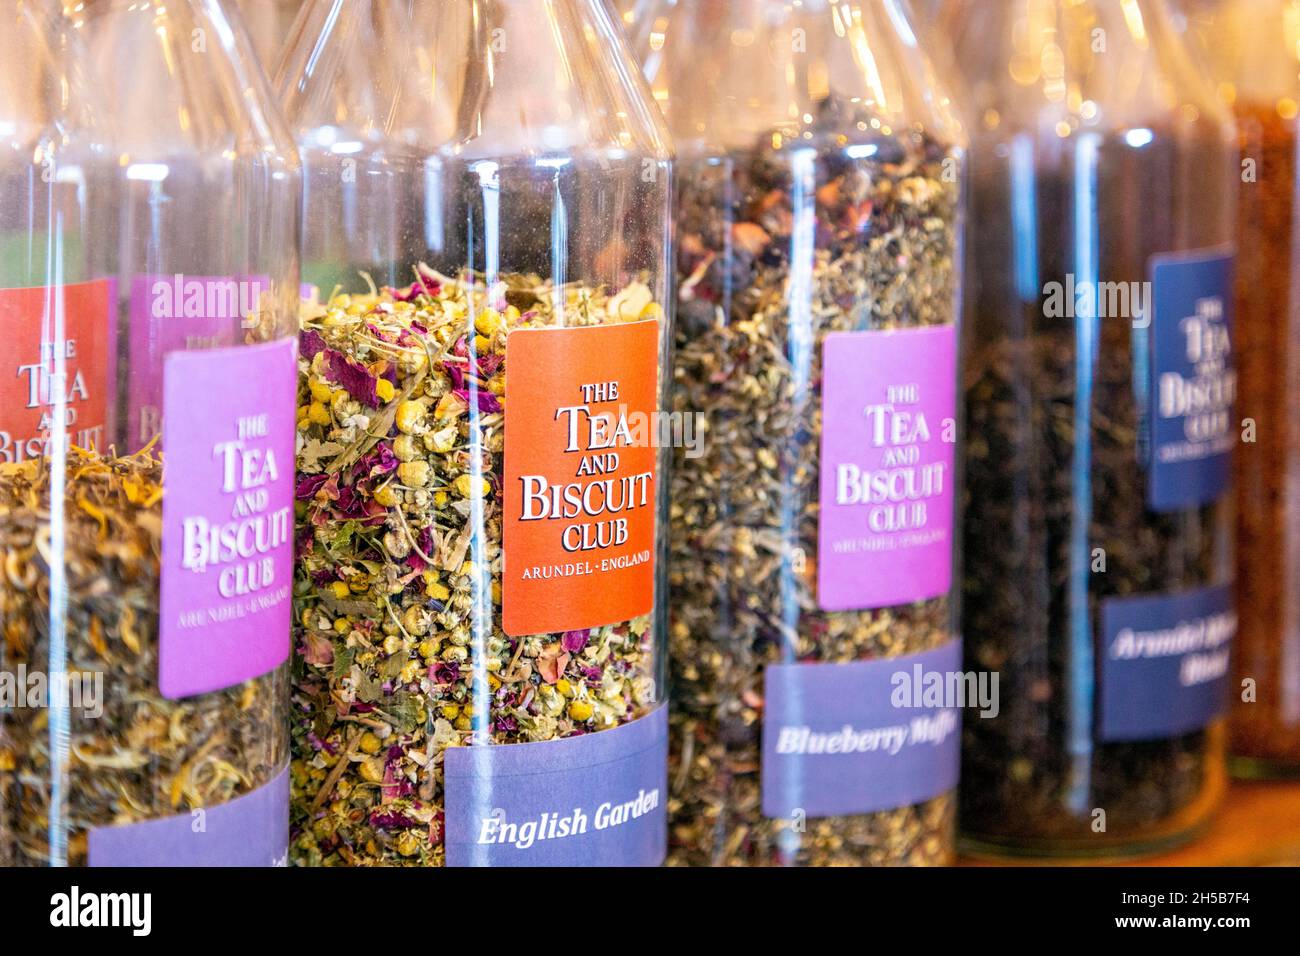 Close-up of a selection of teas in glass jars at The Tea and Biscuit Club shop in Arundel, West Sussex, London, UK Stock Photo